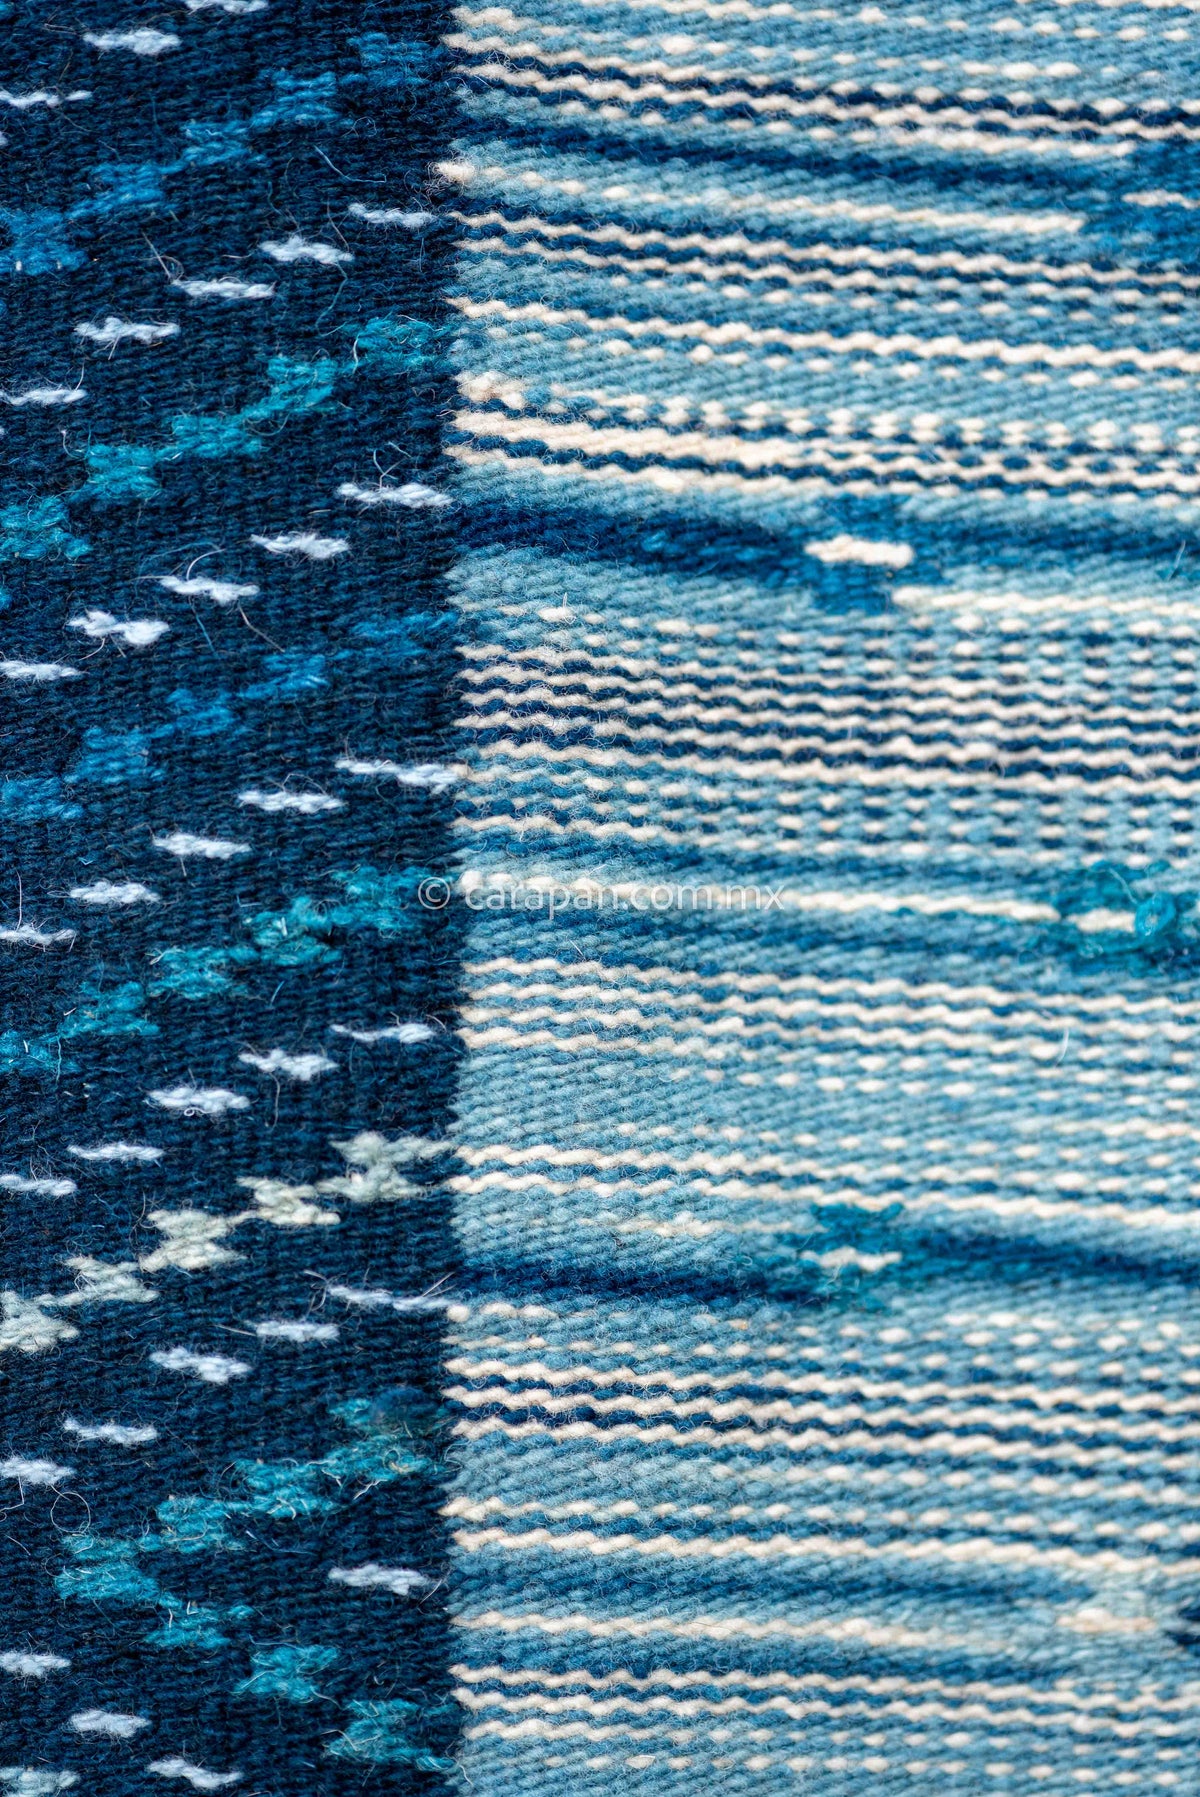 Blue Mexican Sarape made of Wool dyed with Indigo natural pigment decorated with stripes and an oval at the center filled with traditional motifs. Exquisite! 